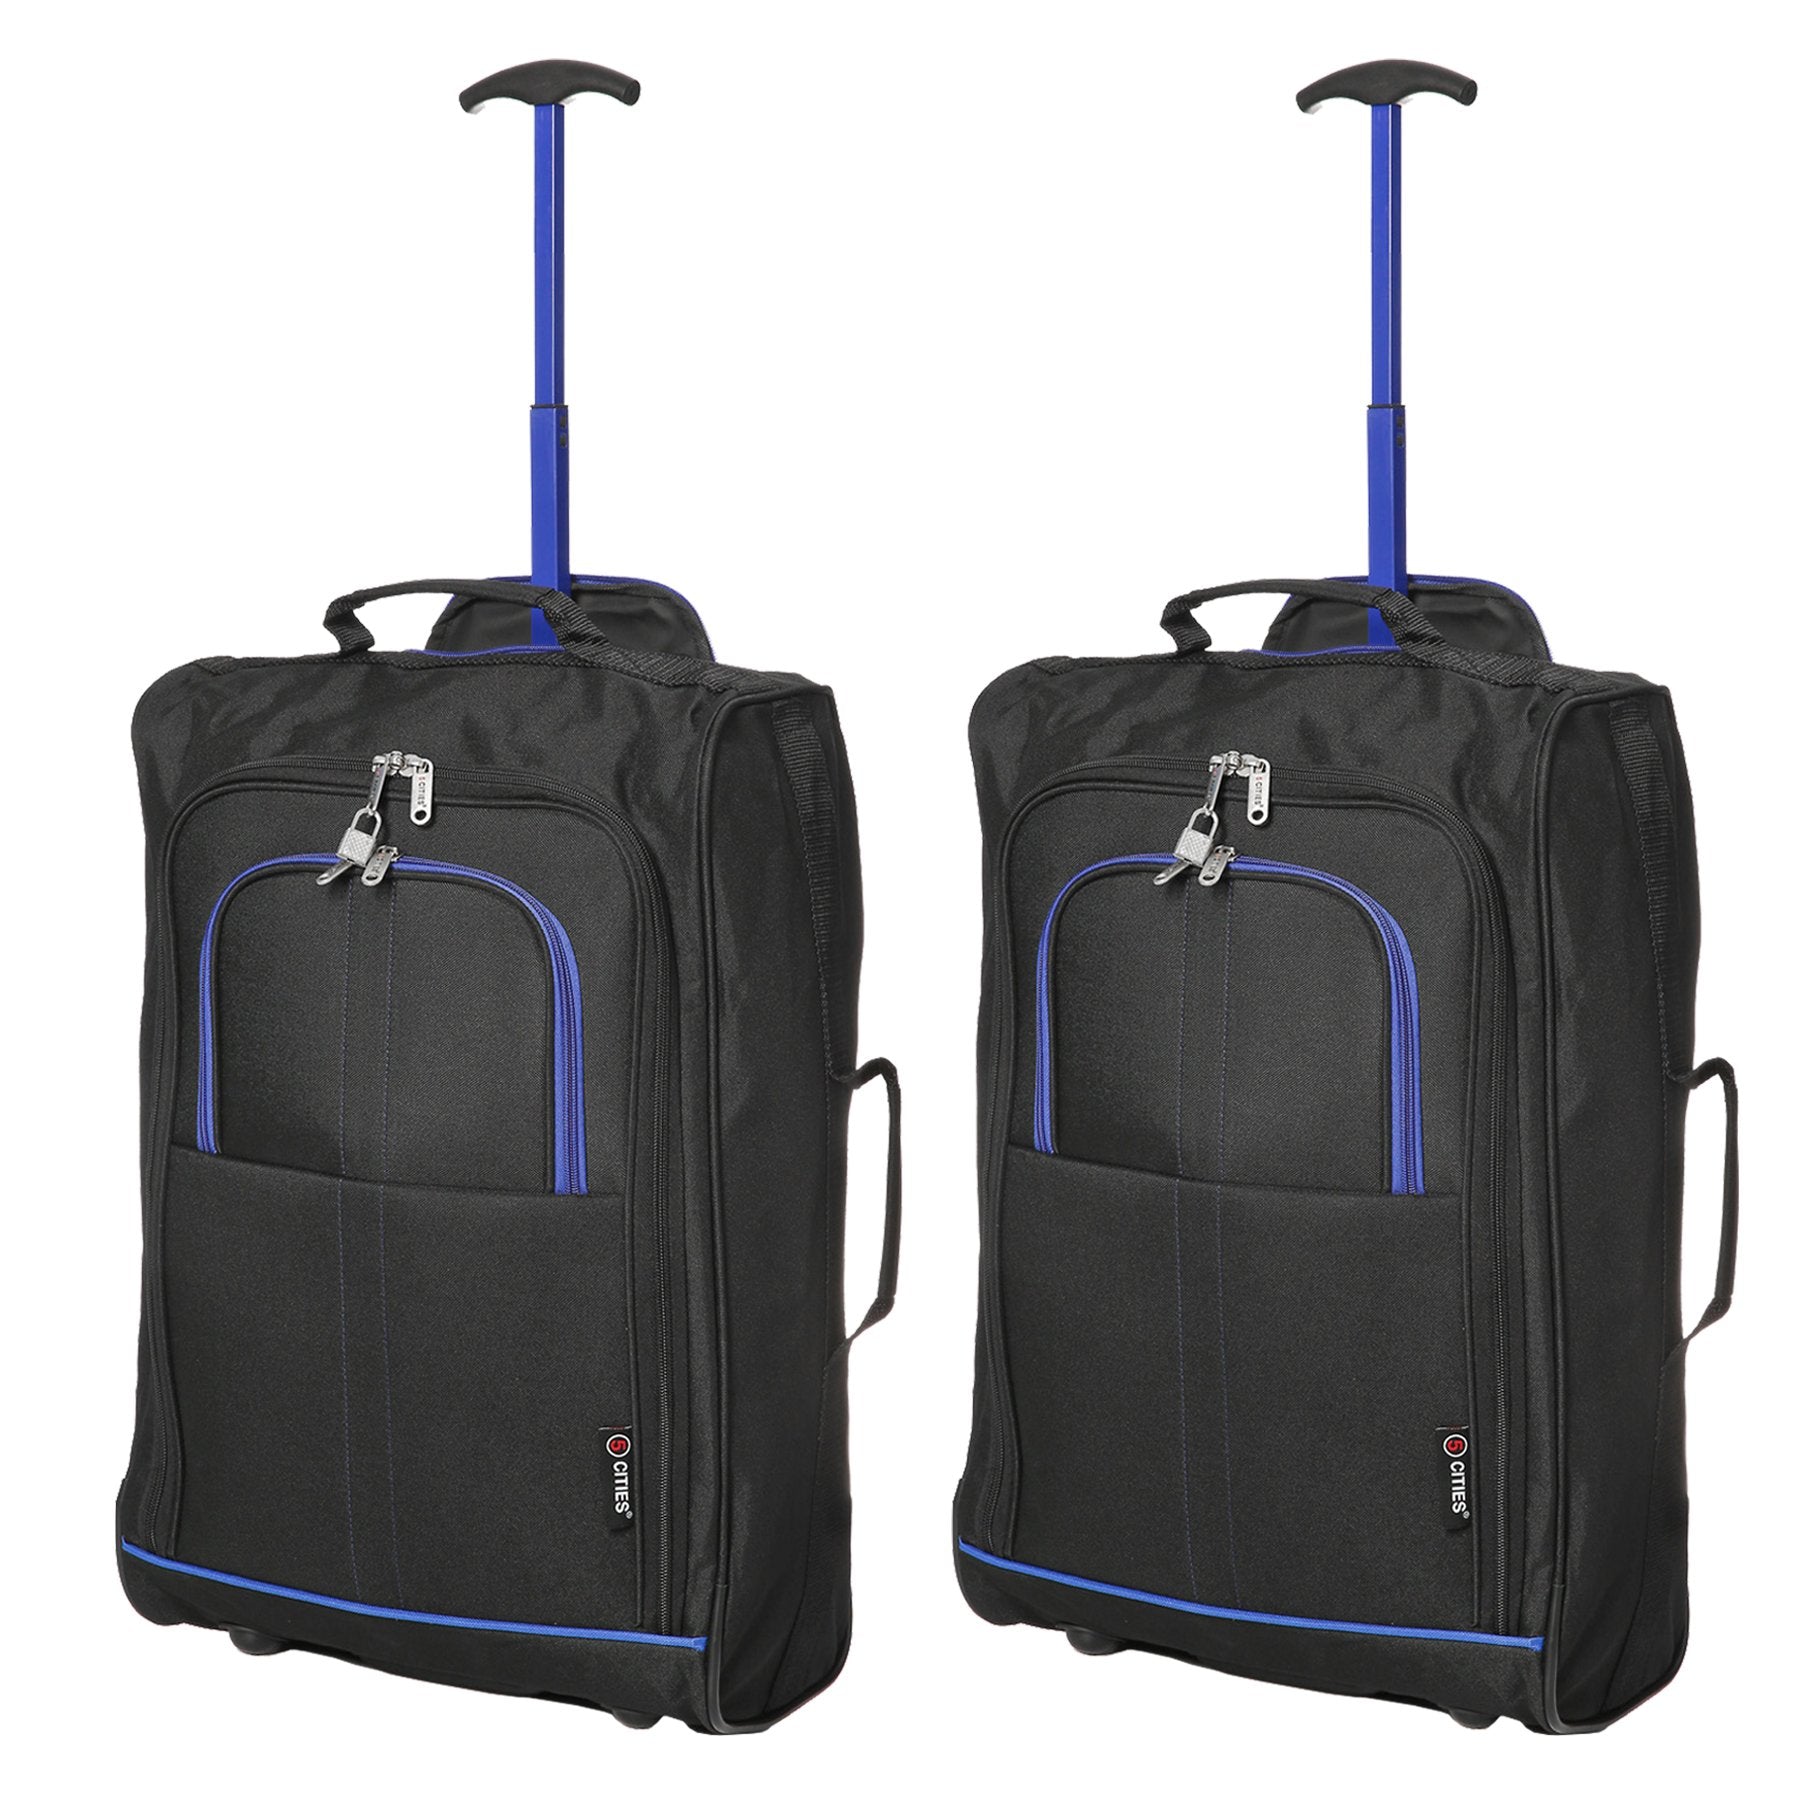 5 Cities (55x35x20cm) Lightweight Cabin Hand Luggage (x2), Fits easyJet/Ryanair Cabin Restrictions 42L